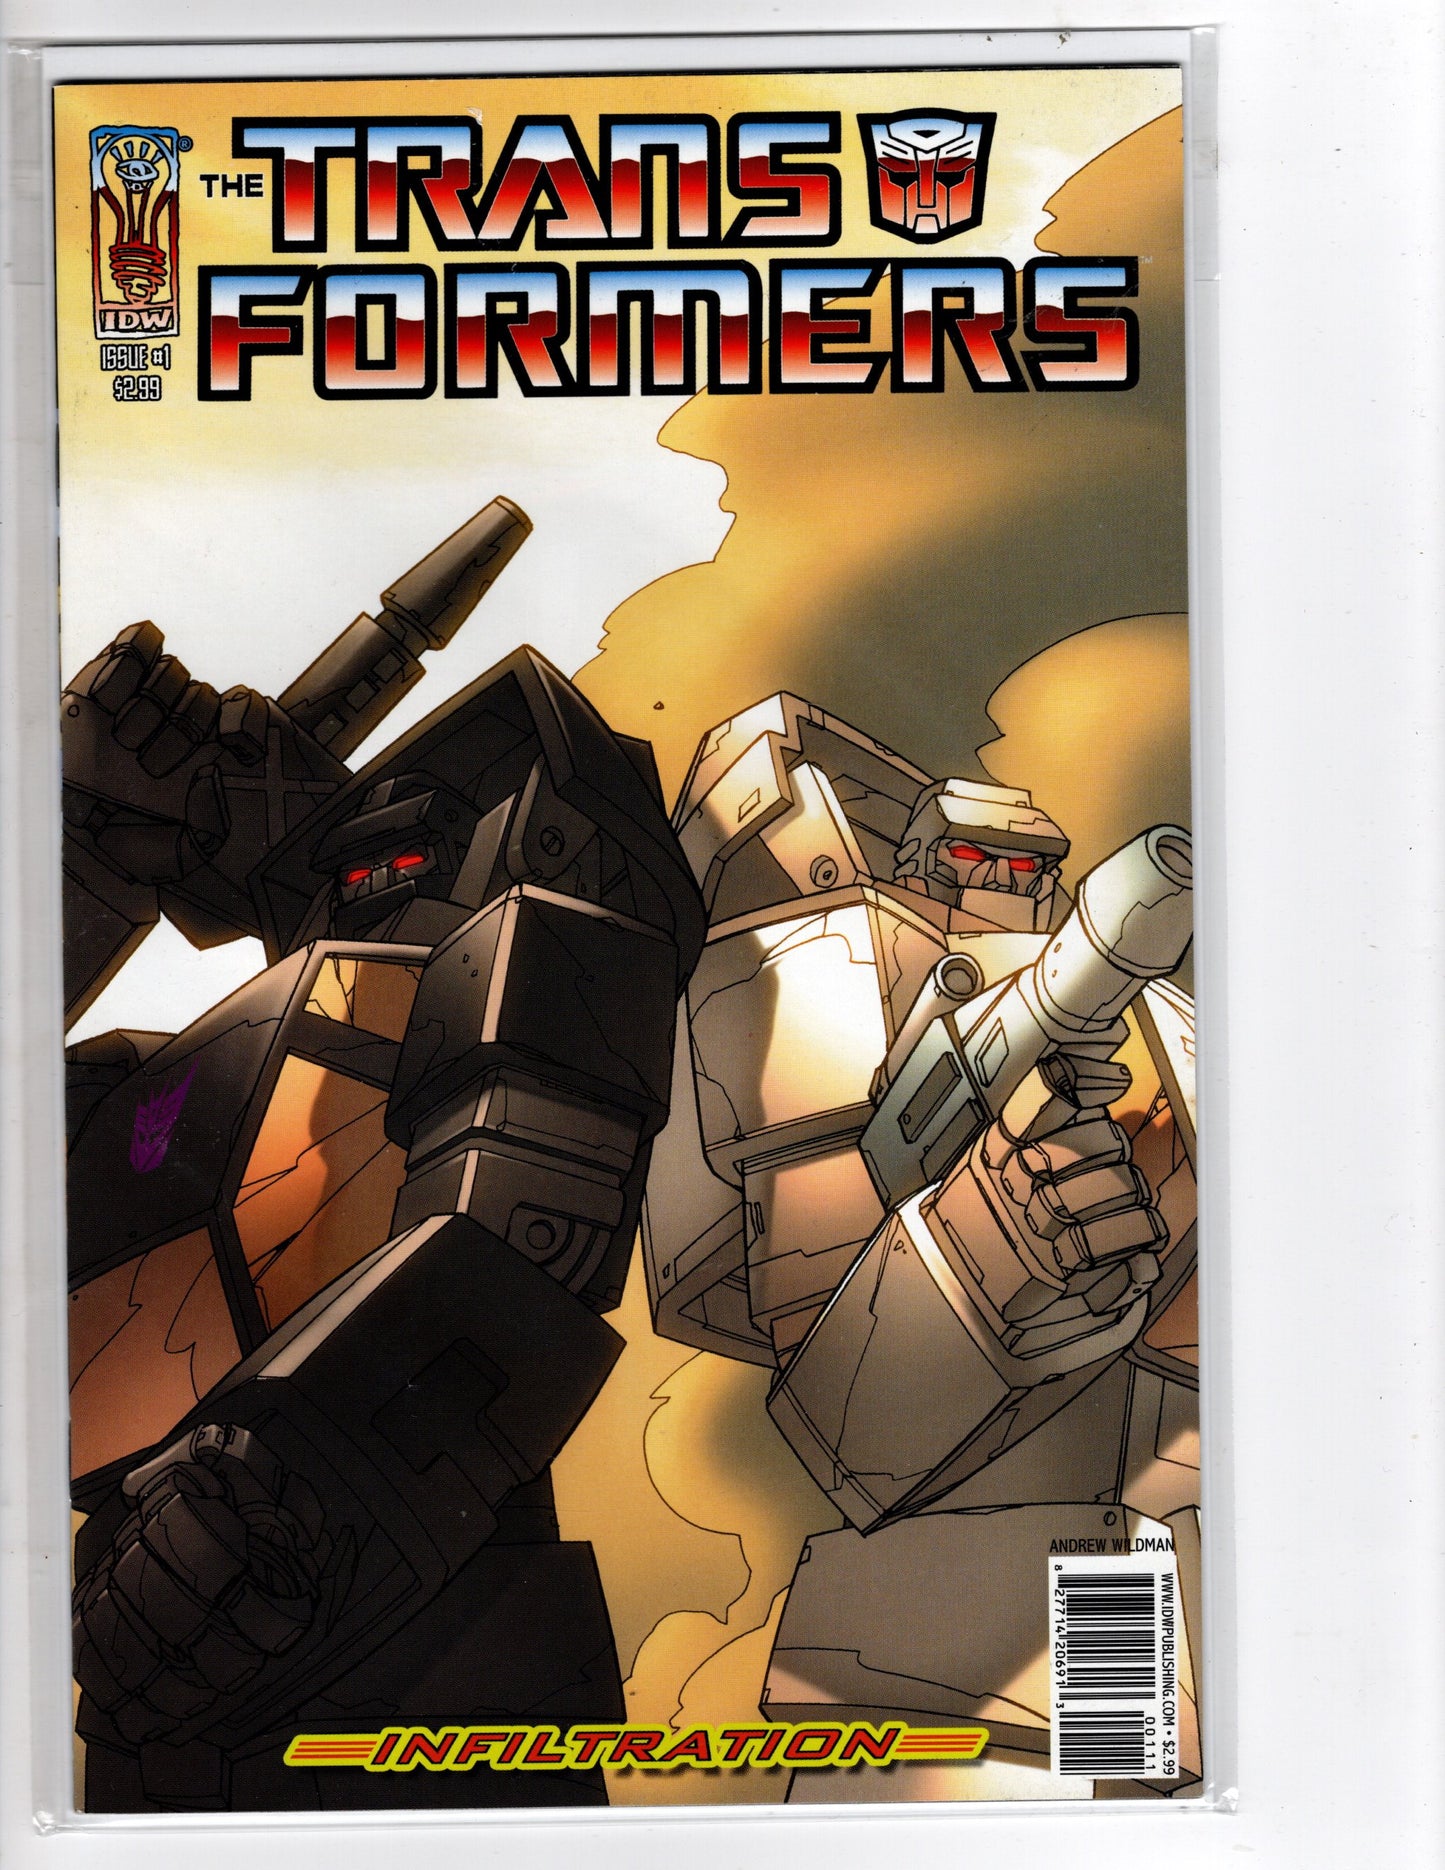 The Transformers: Infiltration #1